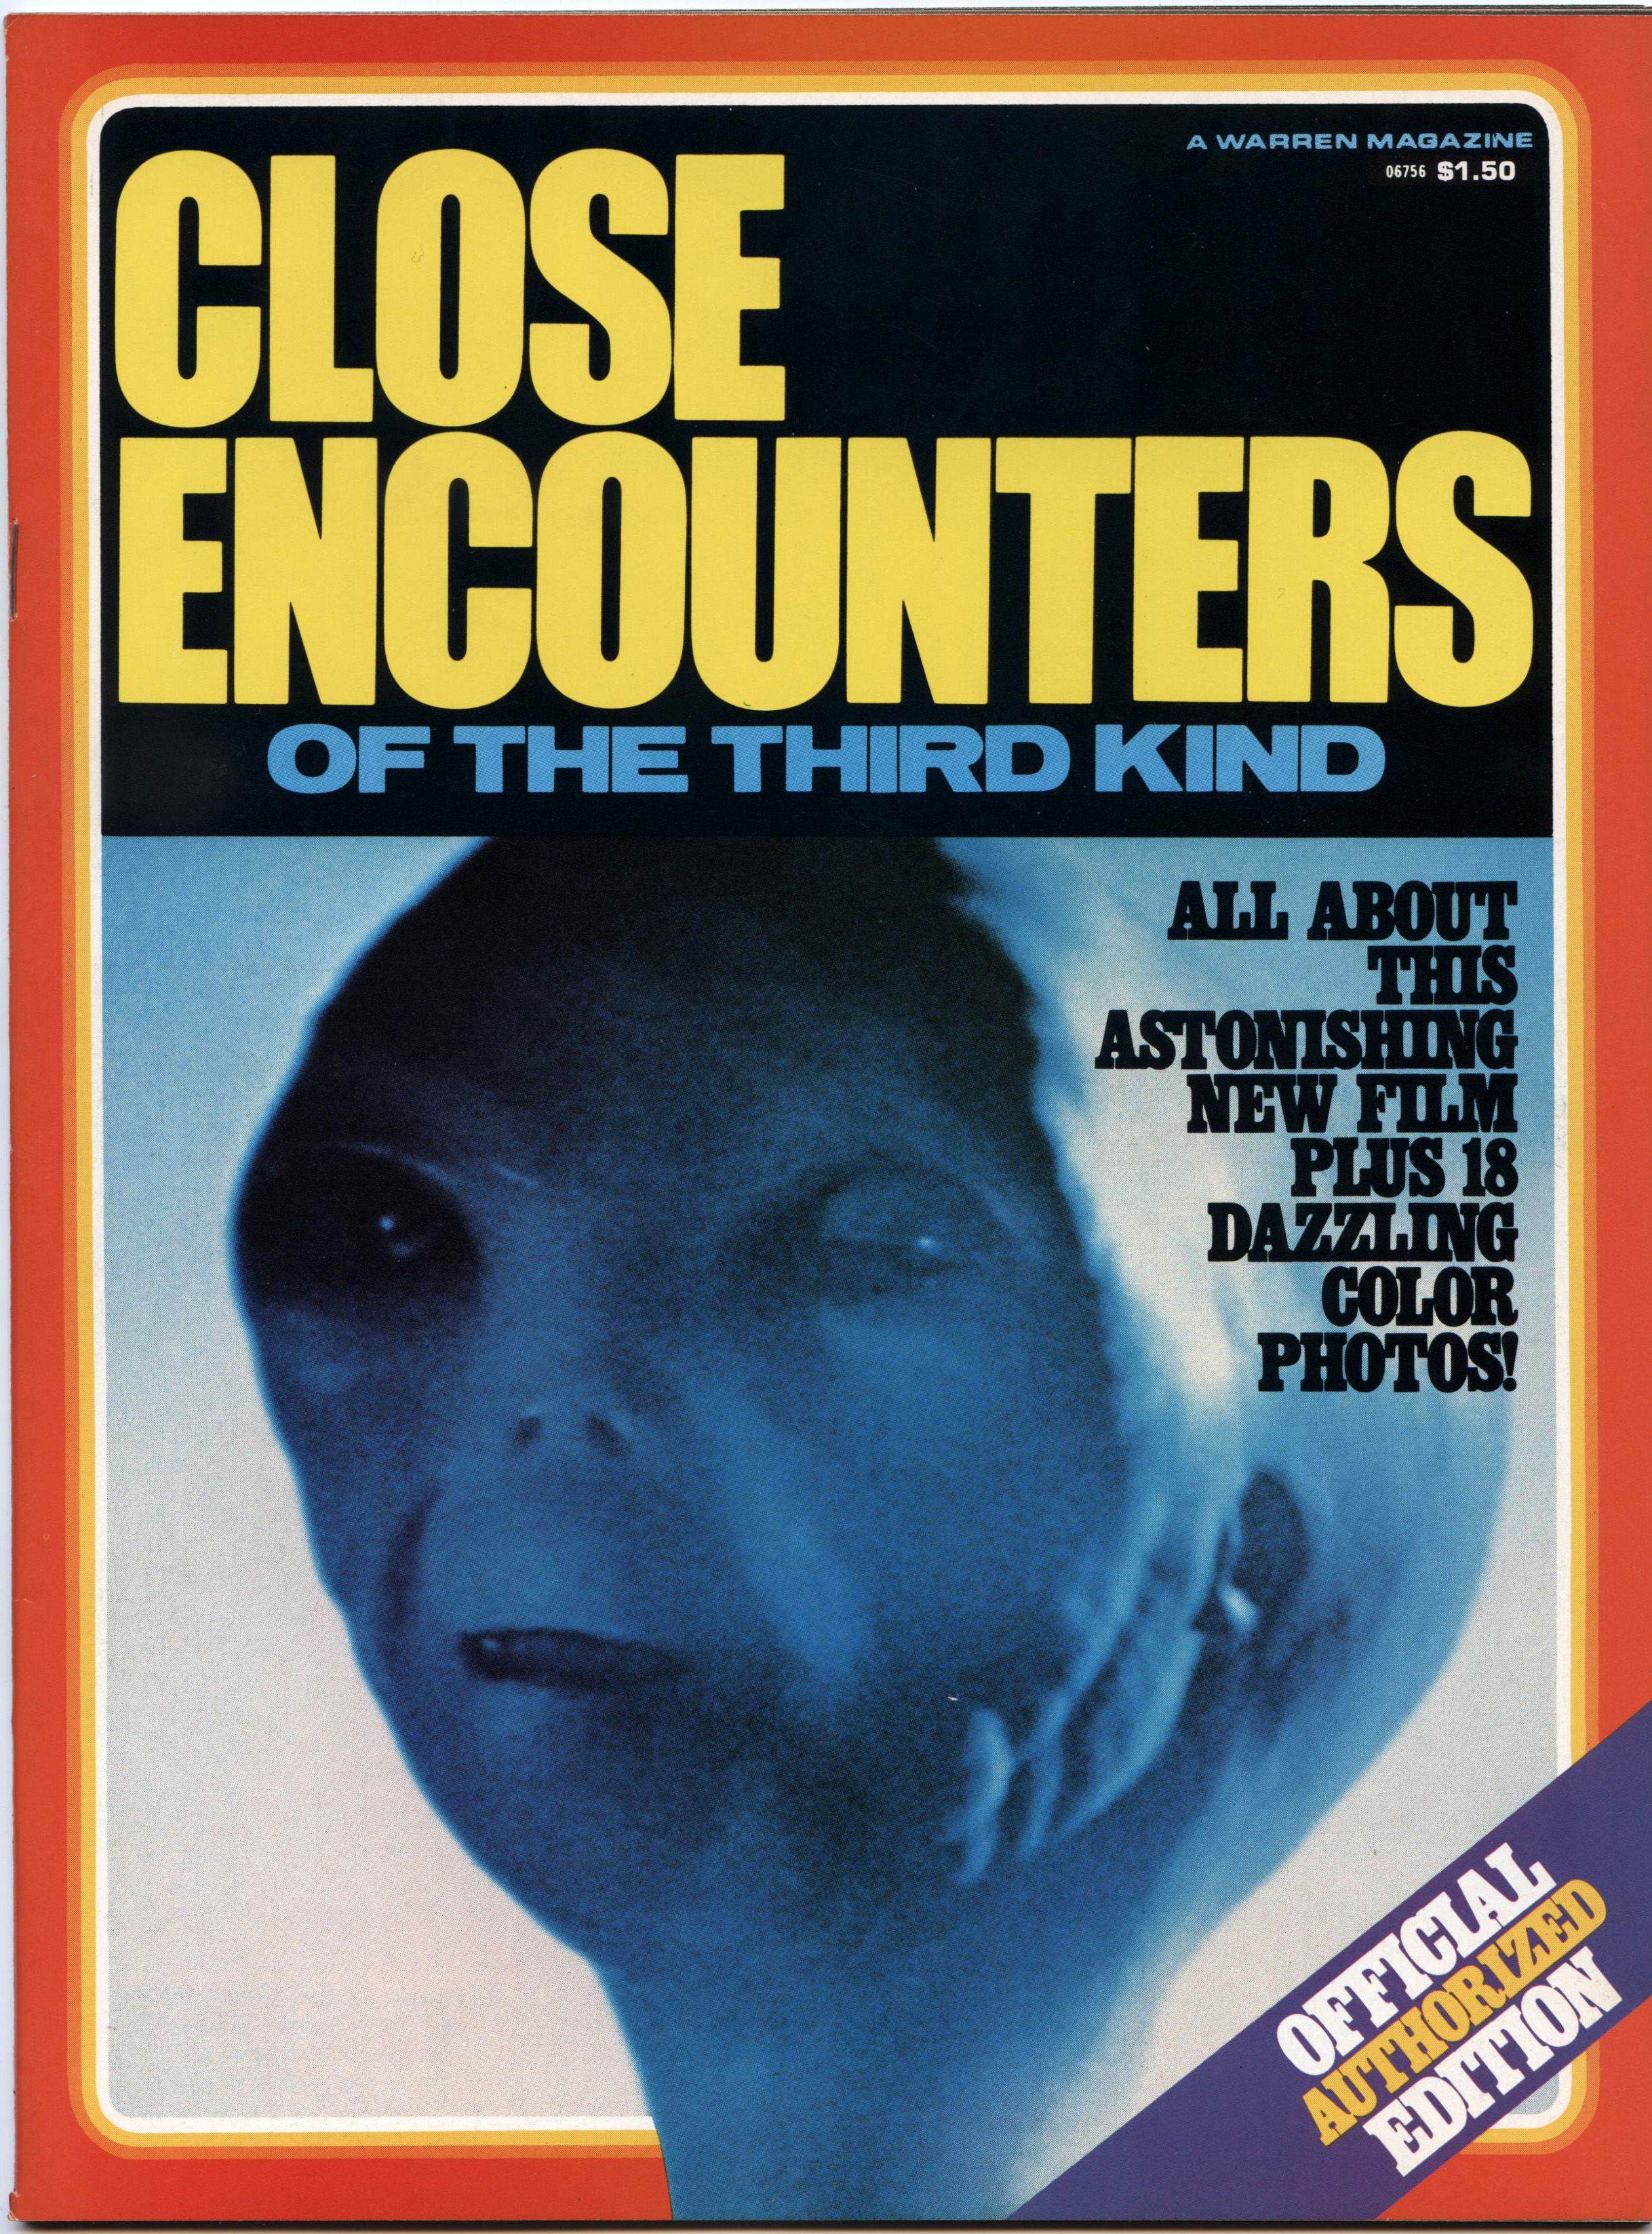 Kind magazine. Close encounters of the third kind. Close encounters of the third kind 1977. Close encounters. Kinds of Magazines.